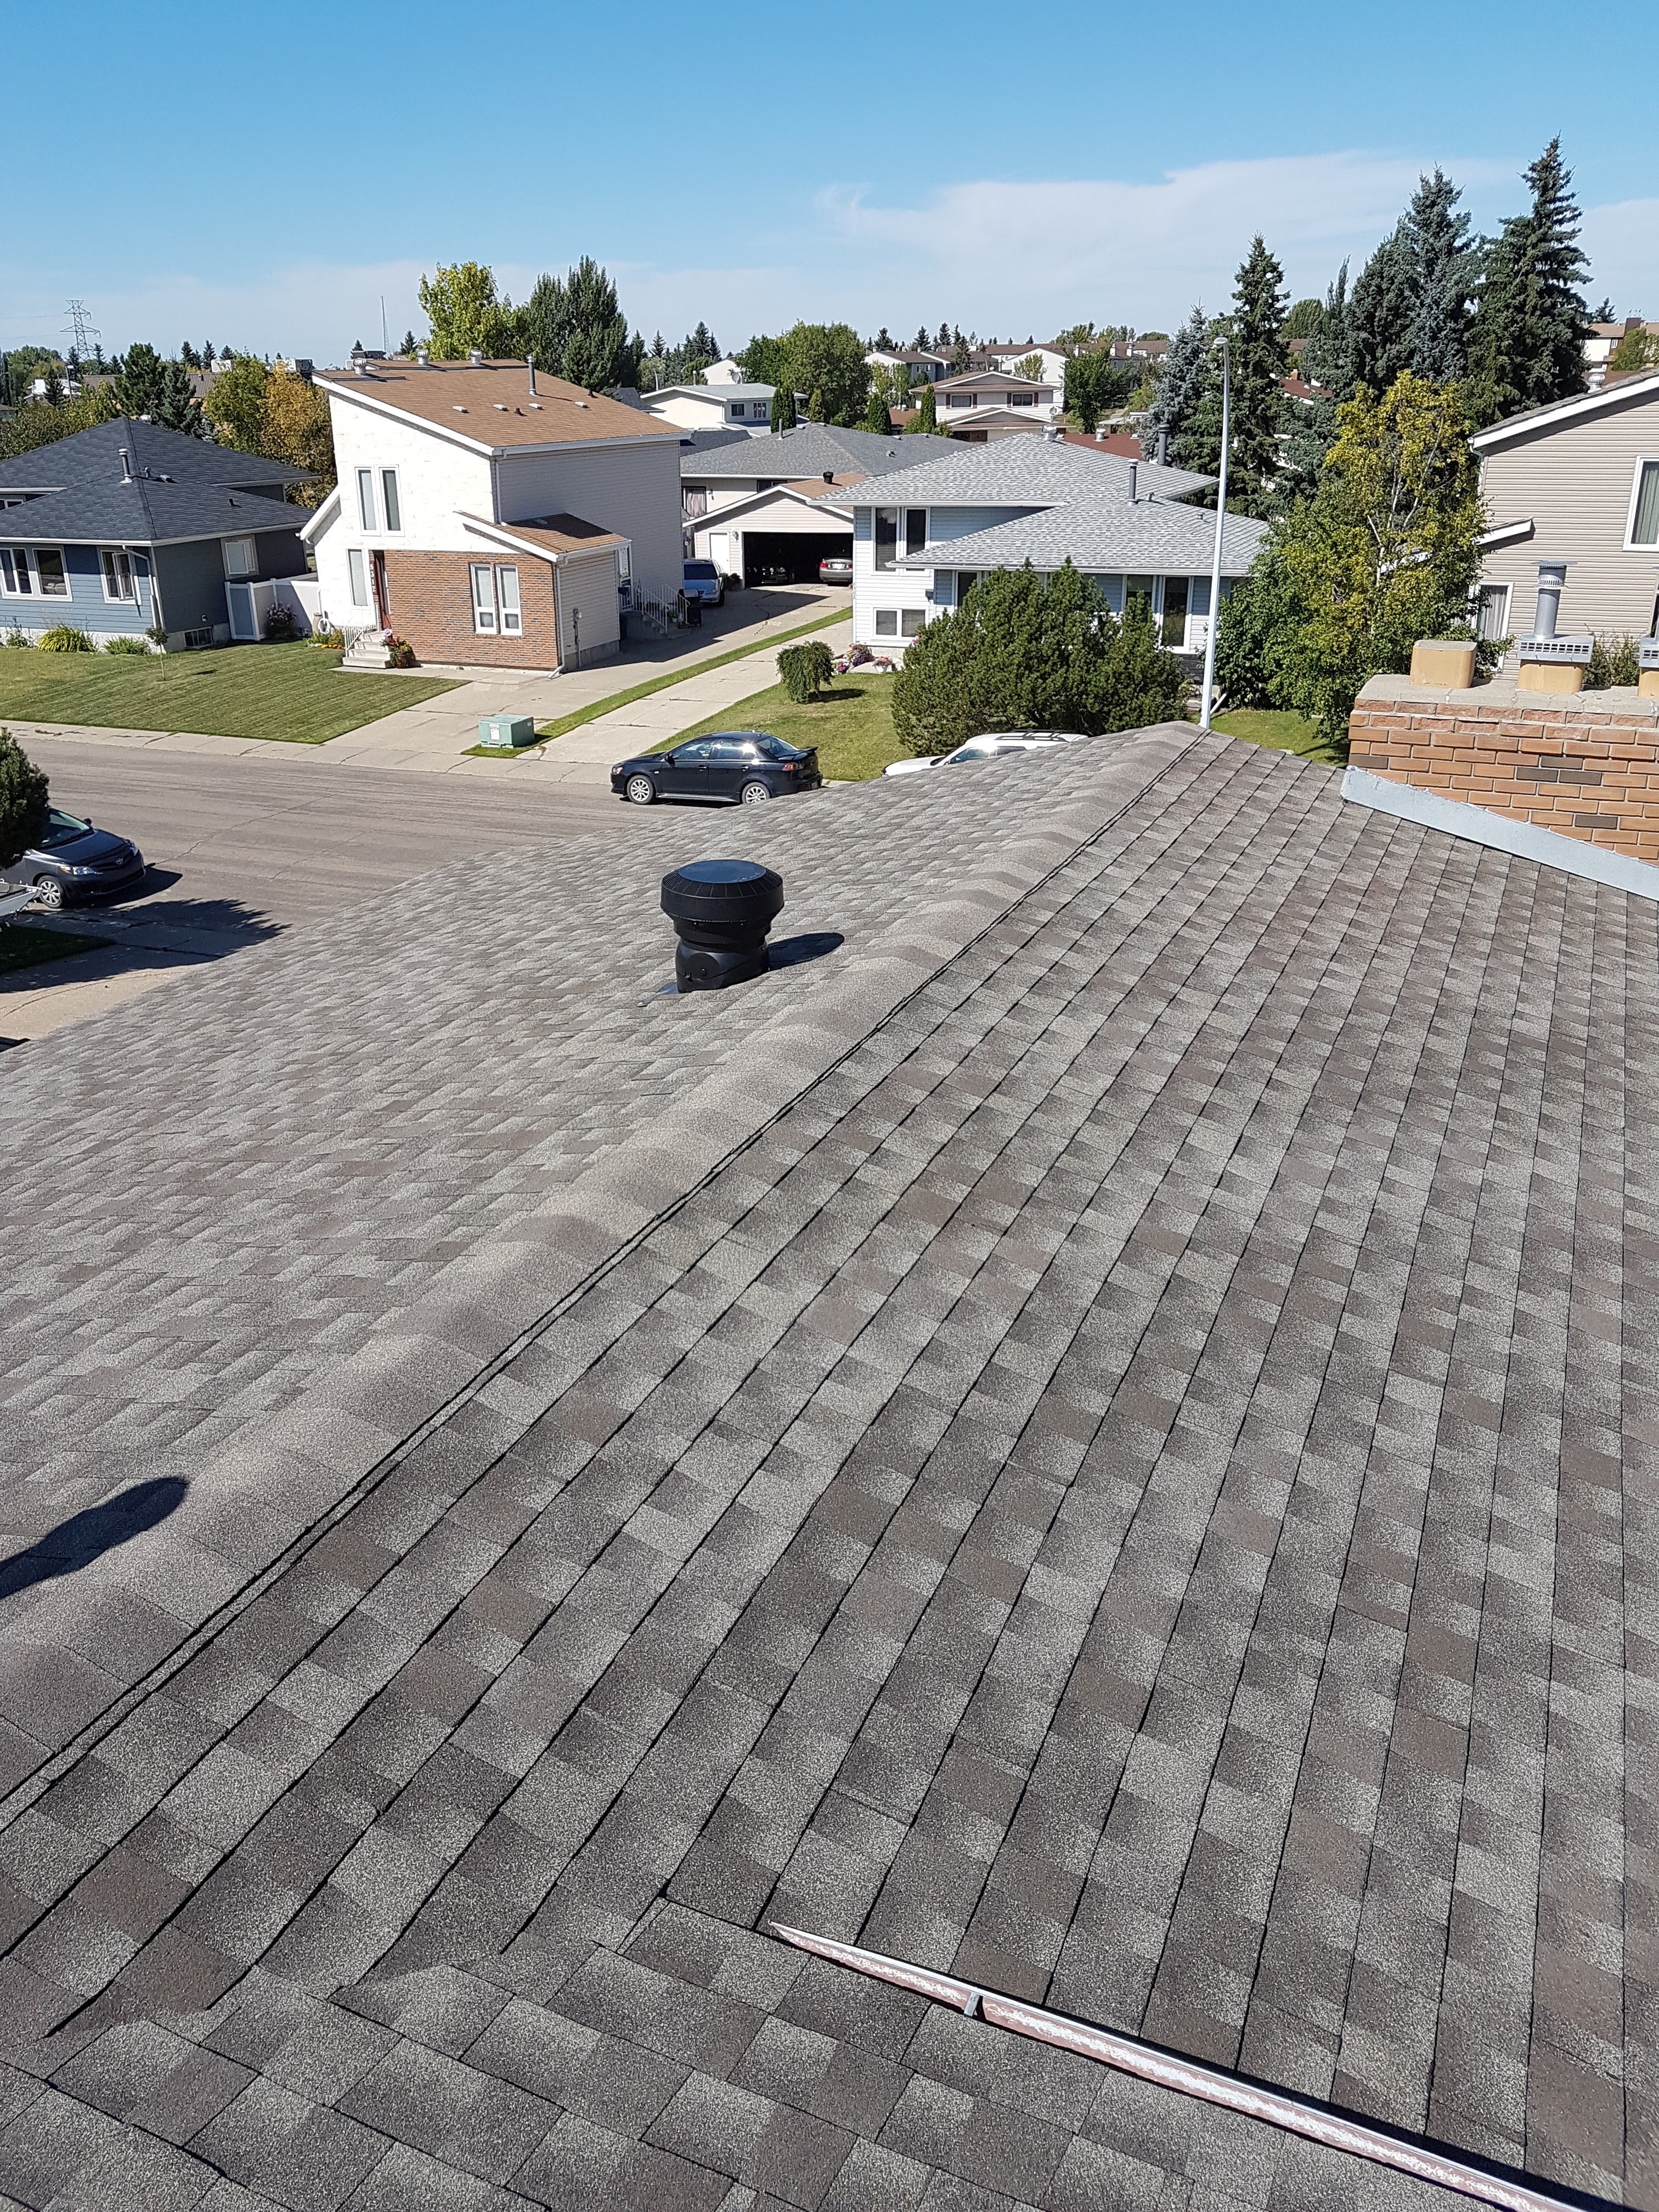 Completed Roof by PJ Roofing